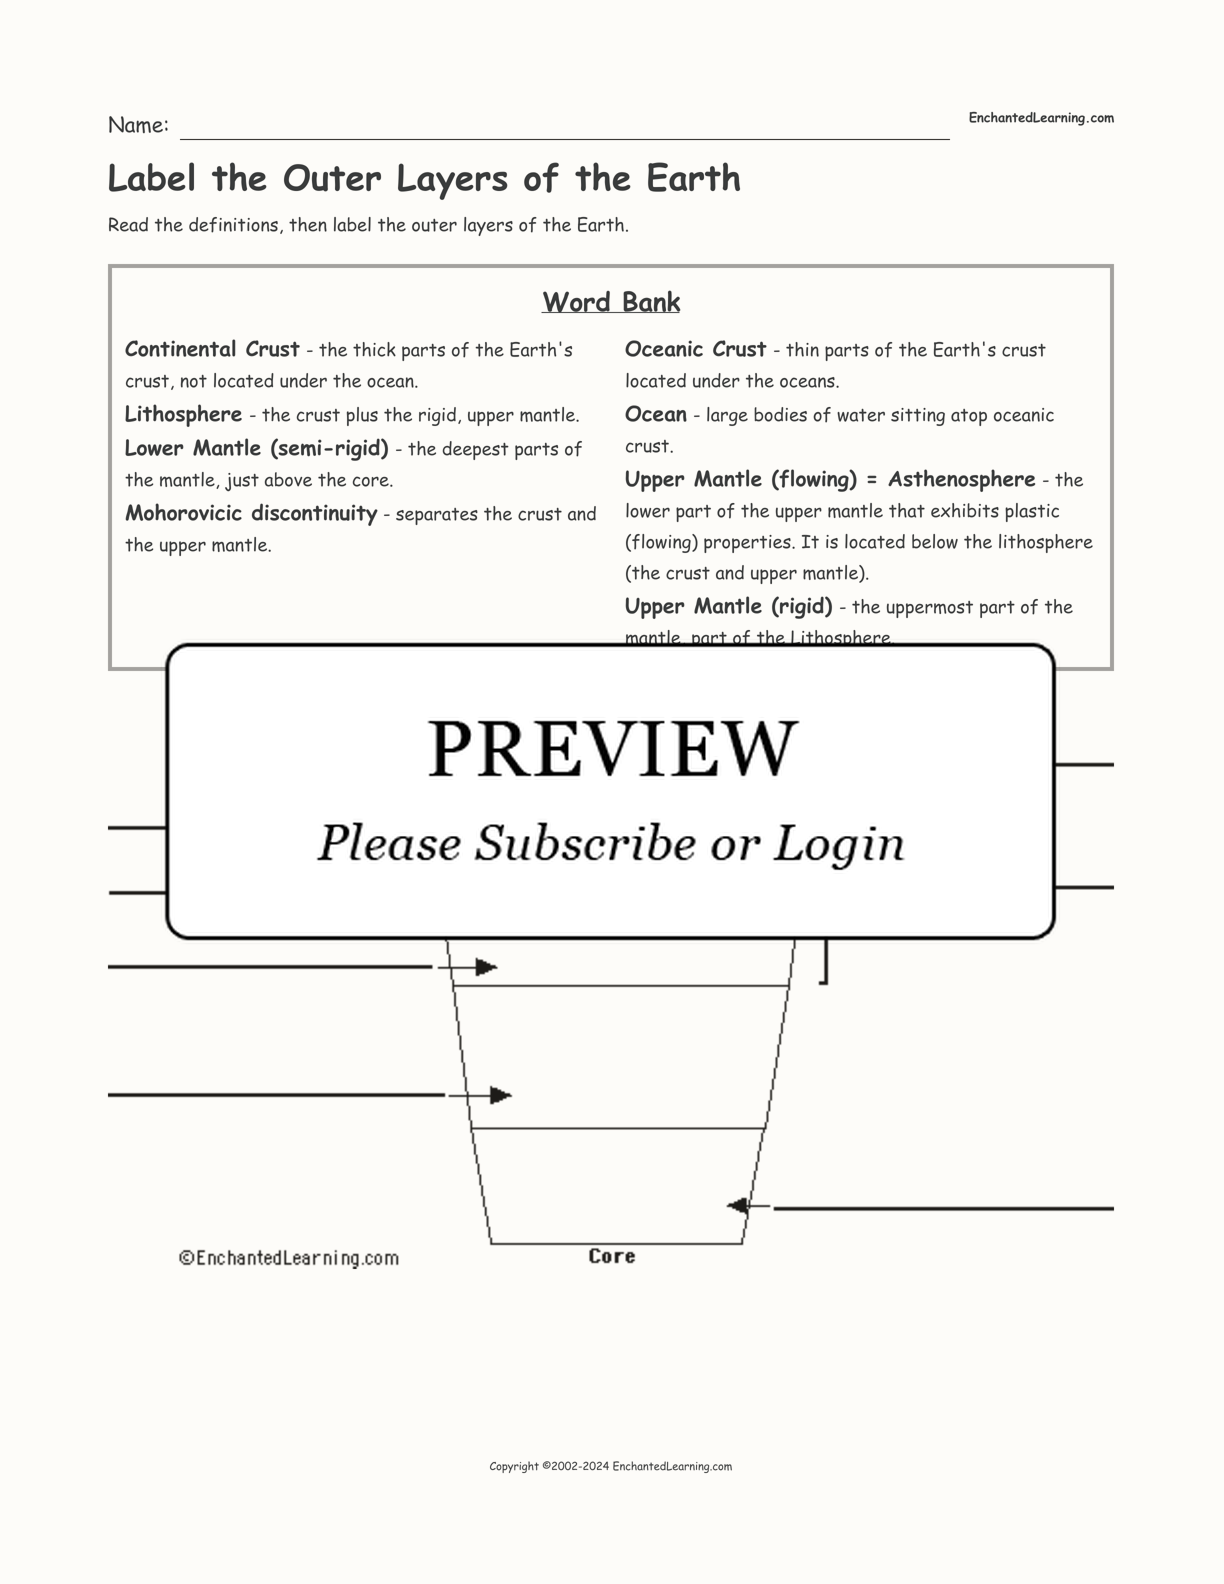 Label the Outer Layers of the Earth interactive worksheet page 1